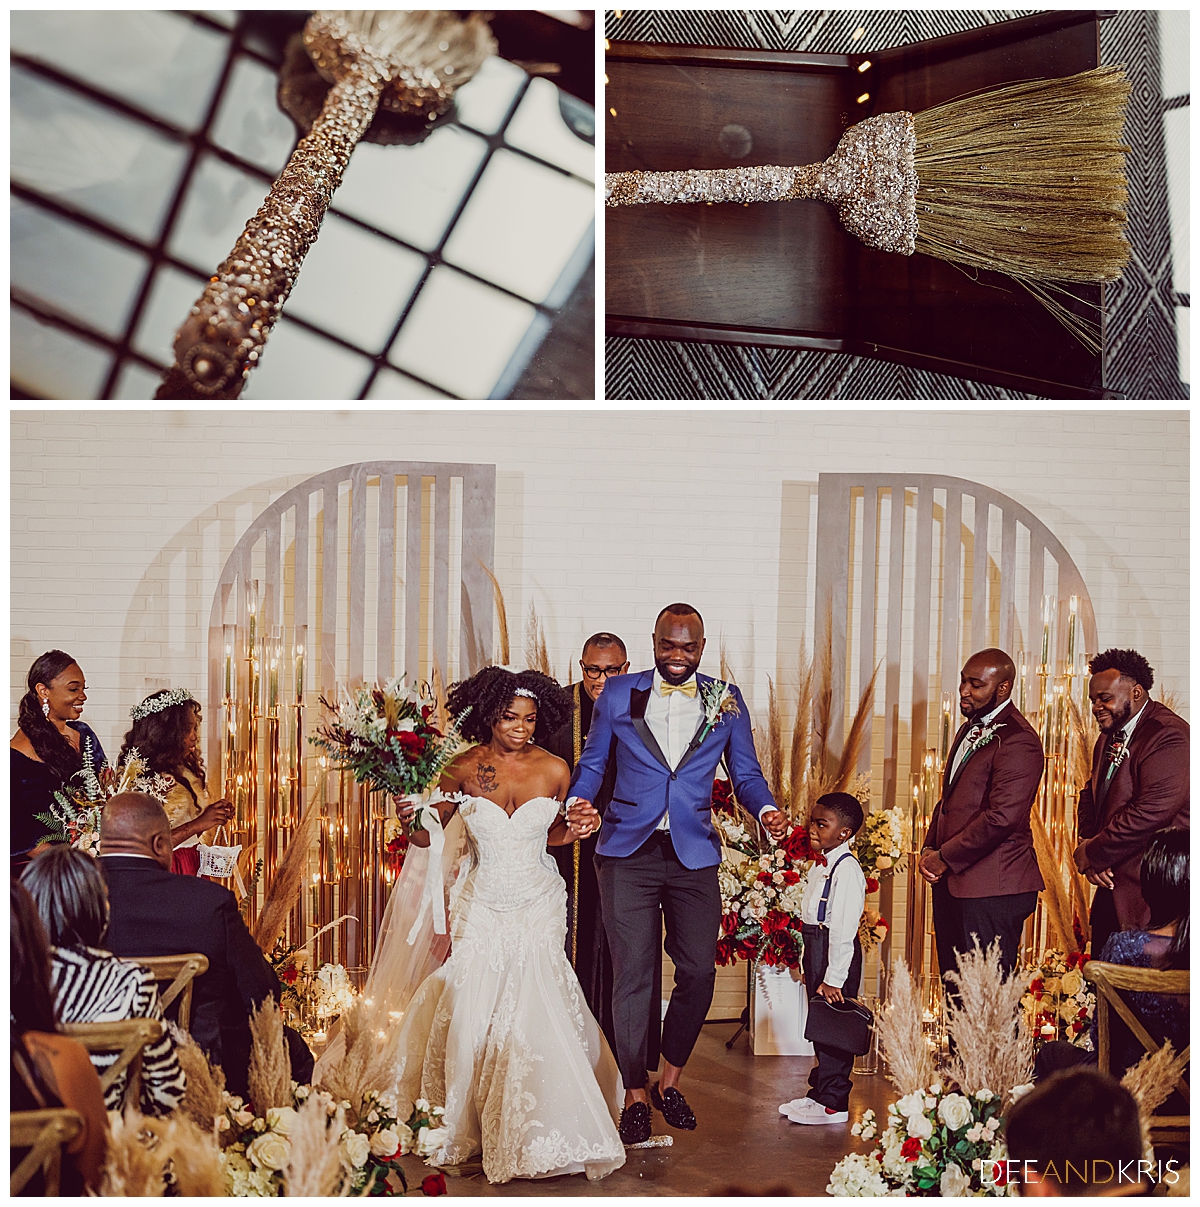 Three images: Top two images of bejeweled broom for Jumping the Broom ceremony. Bottom image of bride and groom jumping the broom.